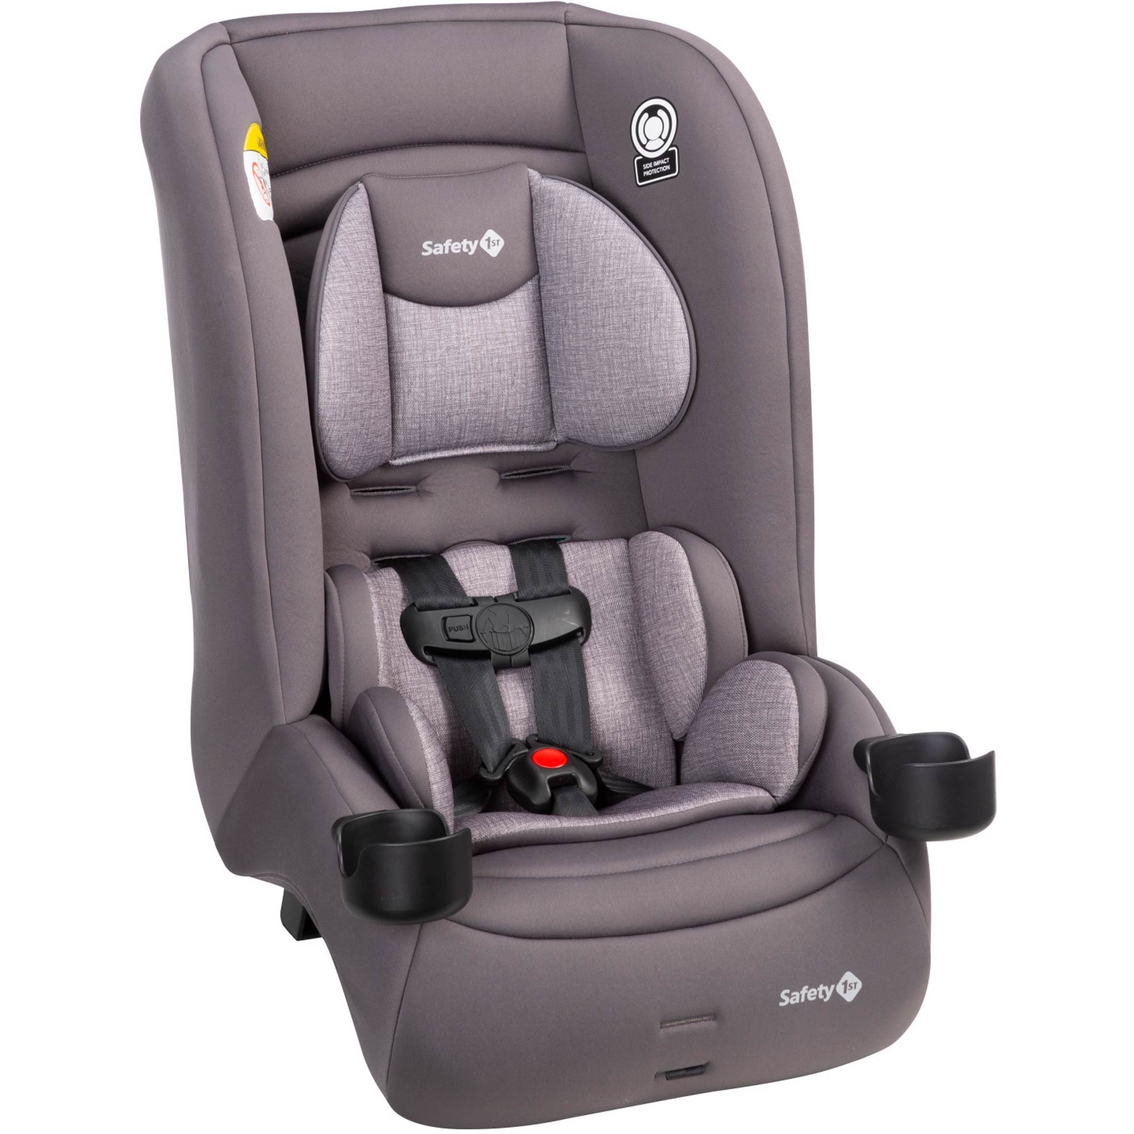 Safety 1st Jive 2 in 1 Convertible Car Seat - Image 3 of 10